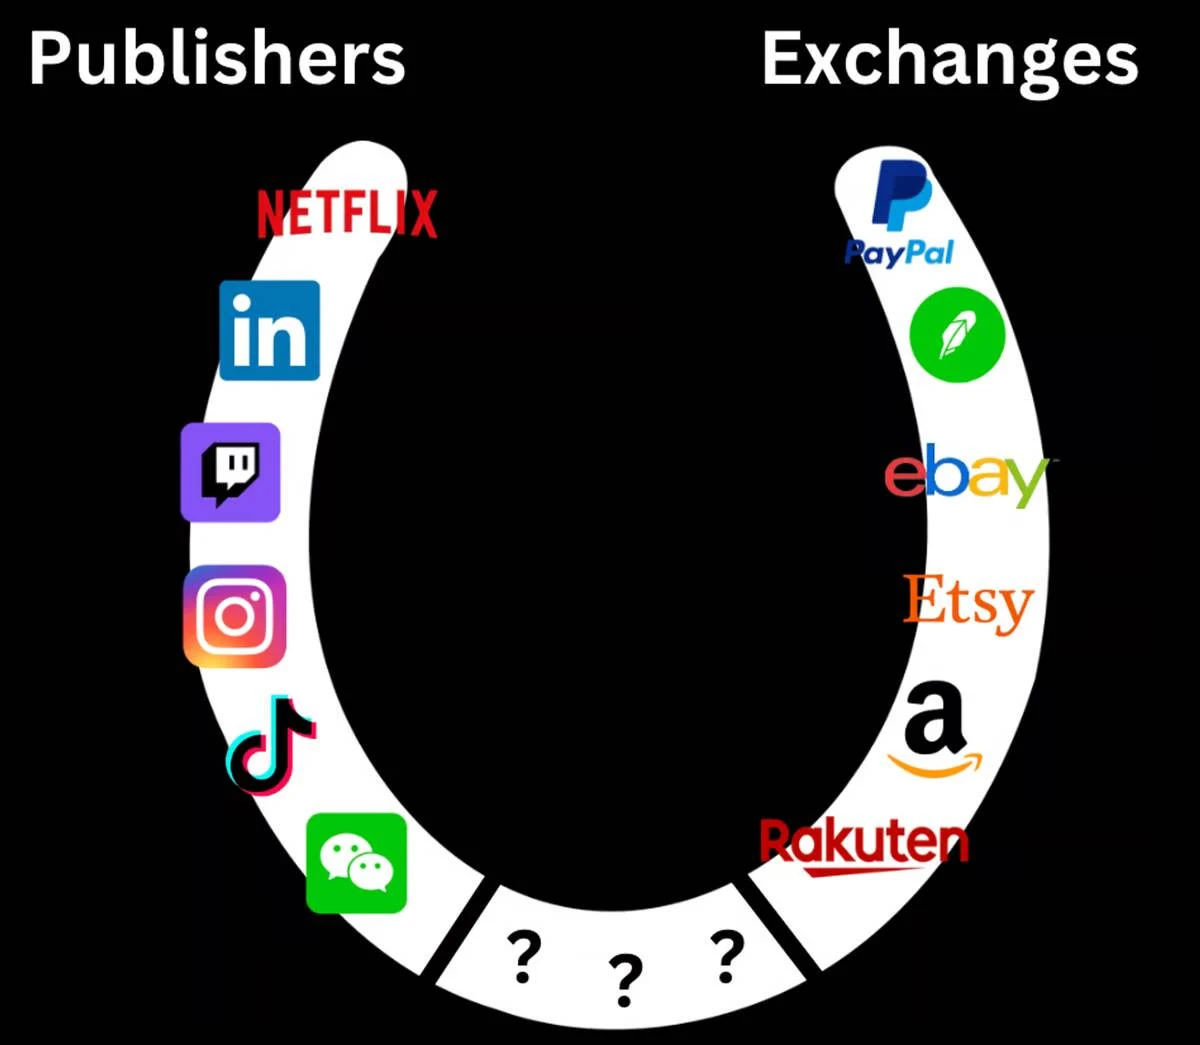 Searching for the next crypto killer app: the combination of content publishers and exchanges